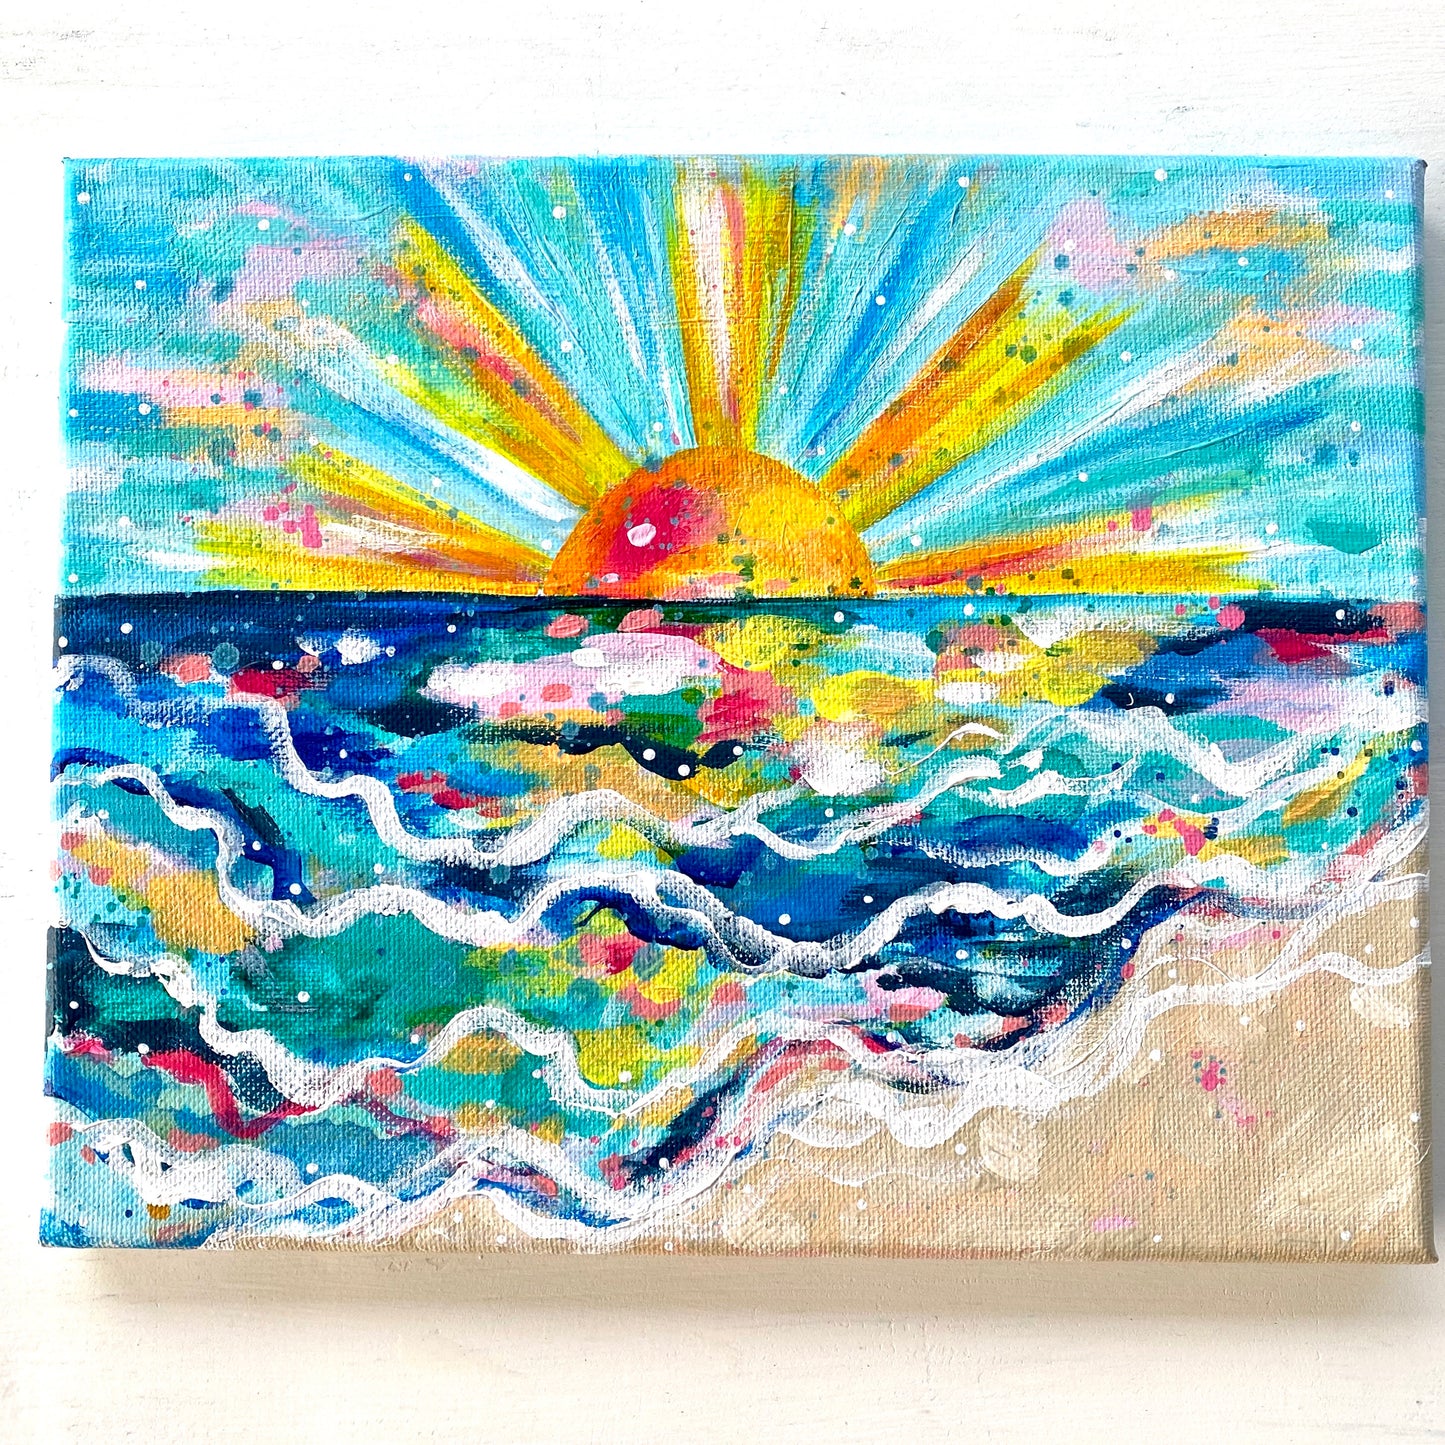 “Shimmer Rays” 8x10 inch original painting on canvas